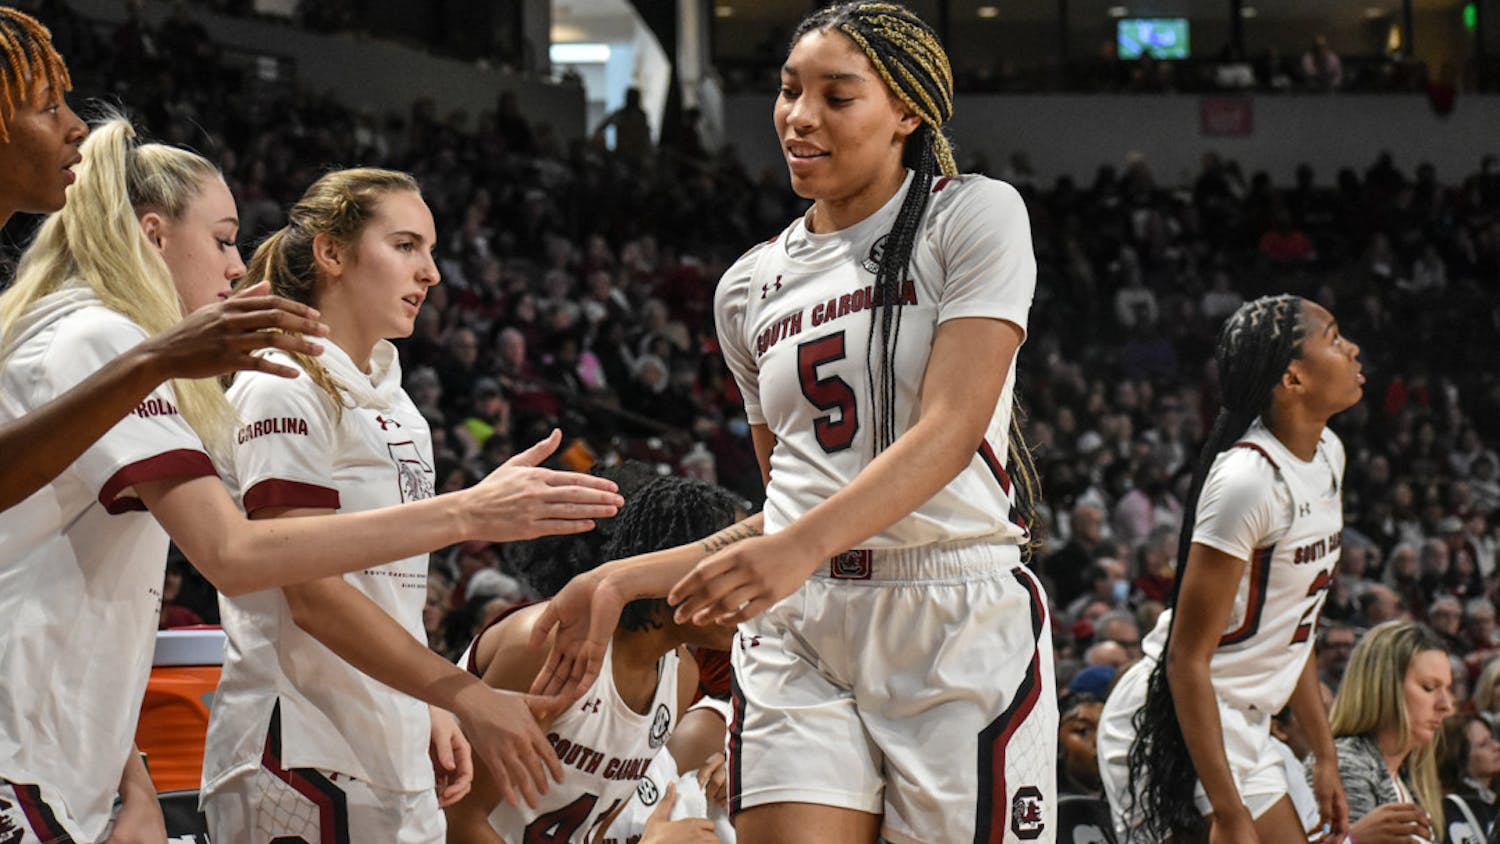 FILE—Senior forward Victoria Saxton high-fives her teammates before taking the bench. Saxton led the team in points, 19, in its SEC tournament game against Arkansas on Friday.